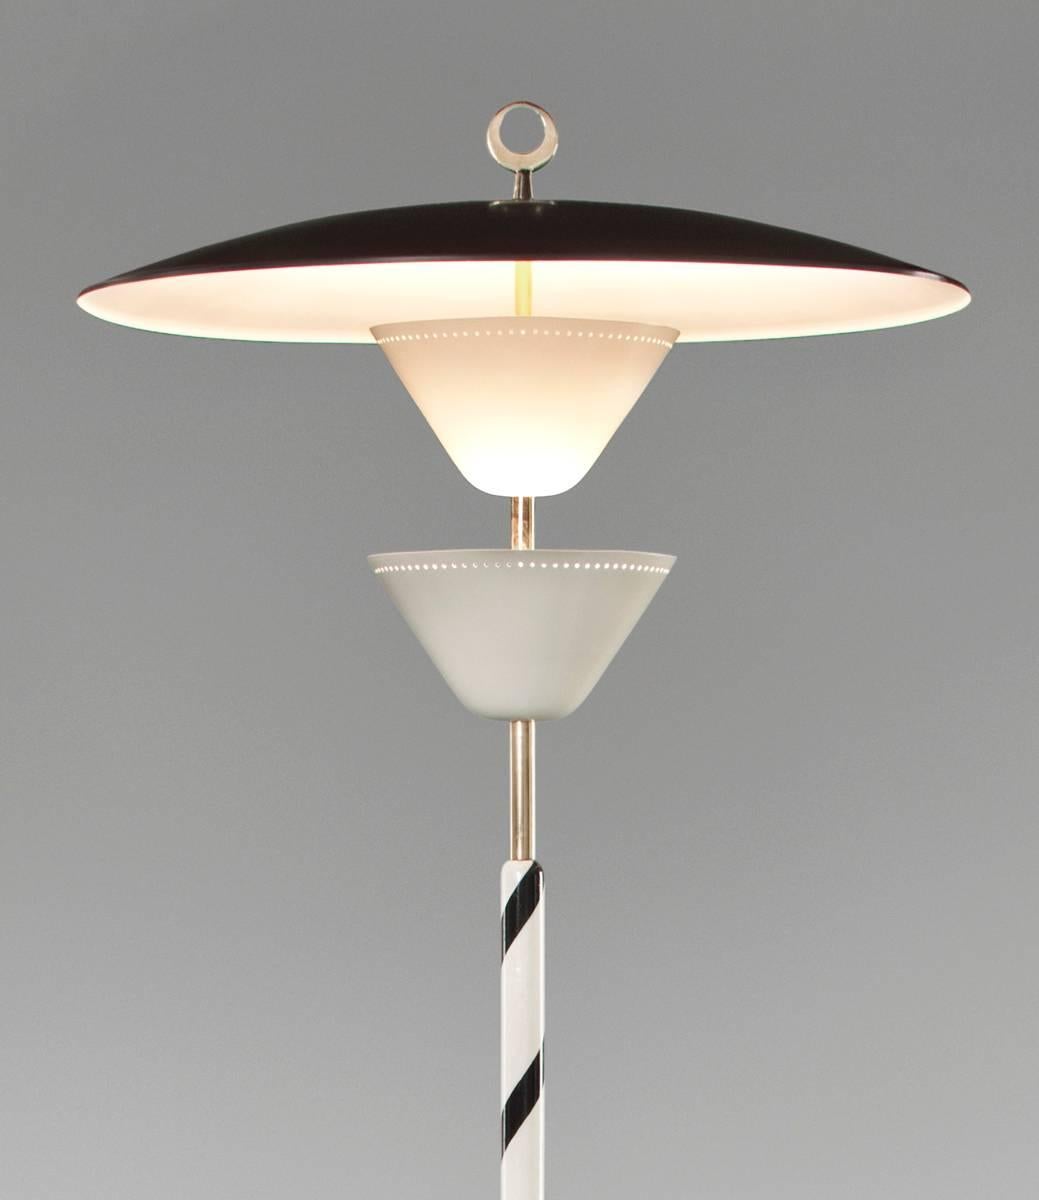 Stilnovo, Rare Italian Painted Metal and Brass Floor Lamp, Mid 20th Century 
A marvelous floor lamp demonstrative of Stilnova quality and innovative design. The ring-like finial, above a single down-turned reflector and two smaller up-turned